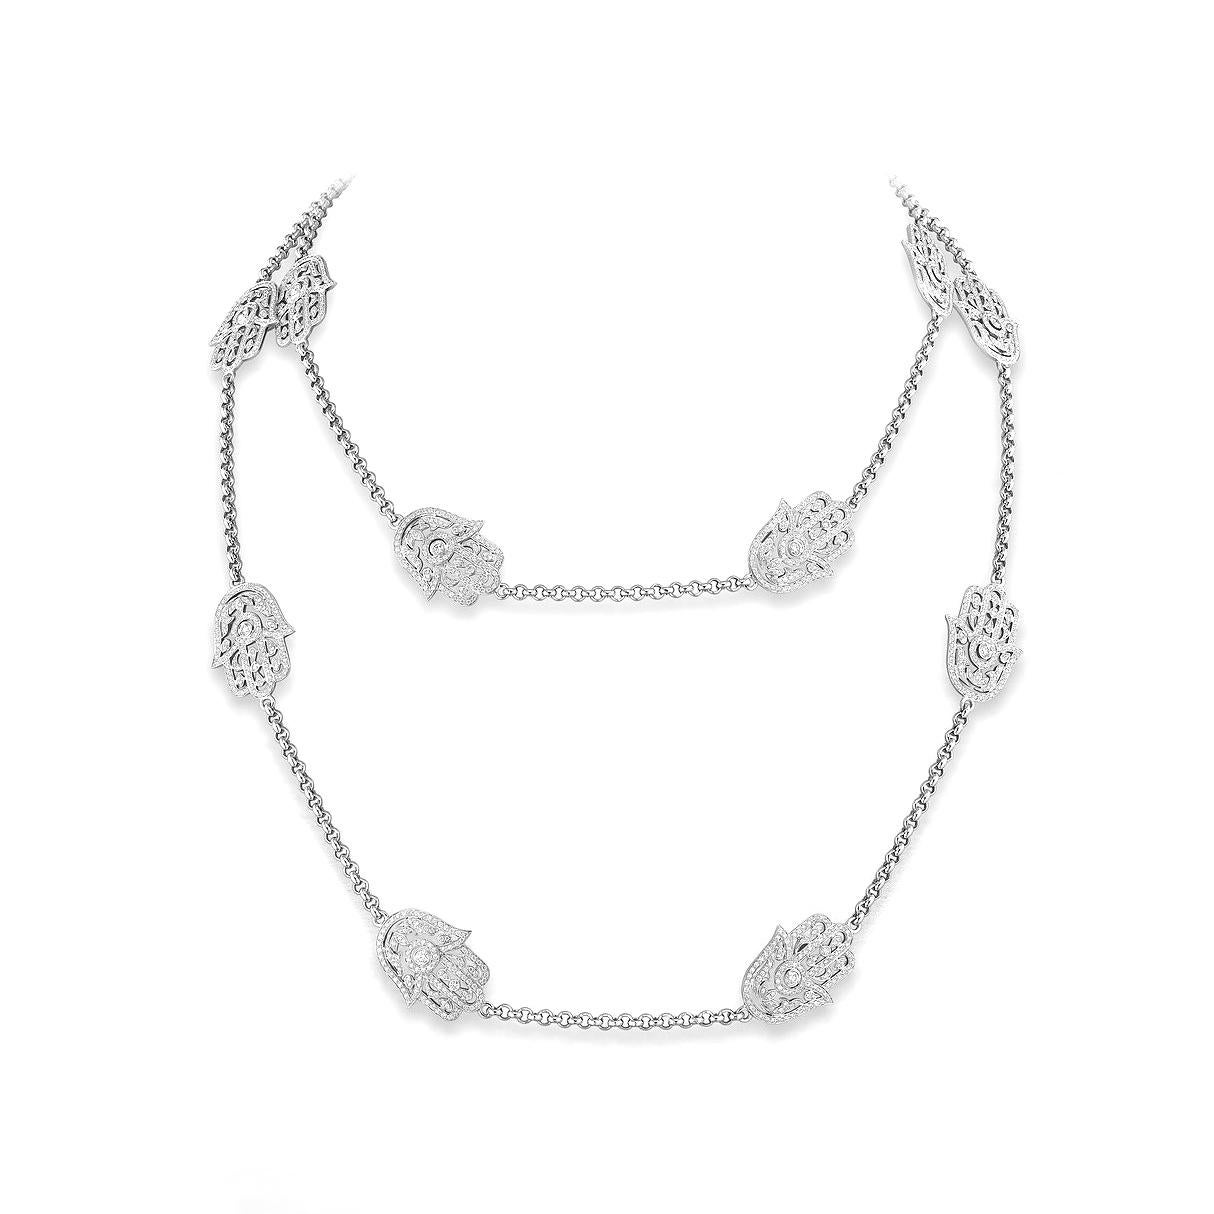 Fatma Hand necklace in 18kt white gold set with 1495 diamonds 8.49 cts (107 cm)    